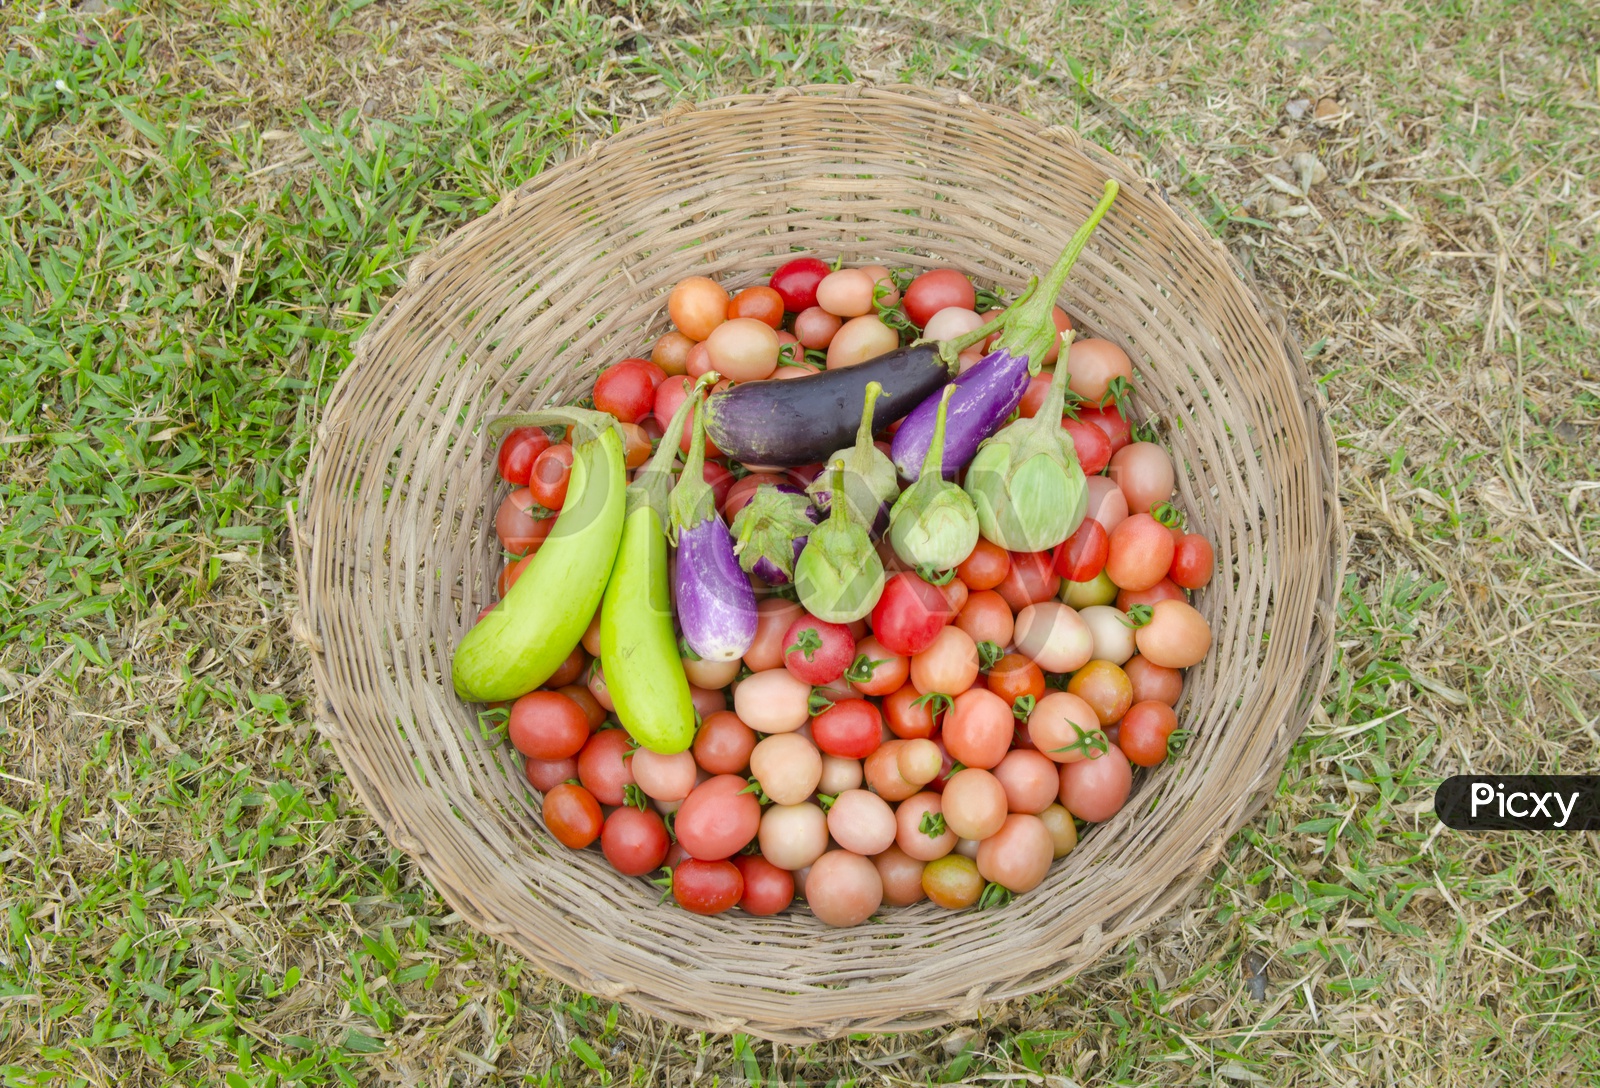 Tomatoes and Brinjal Vegetables in a Basket